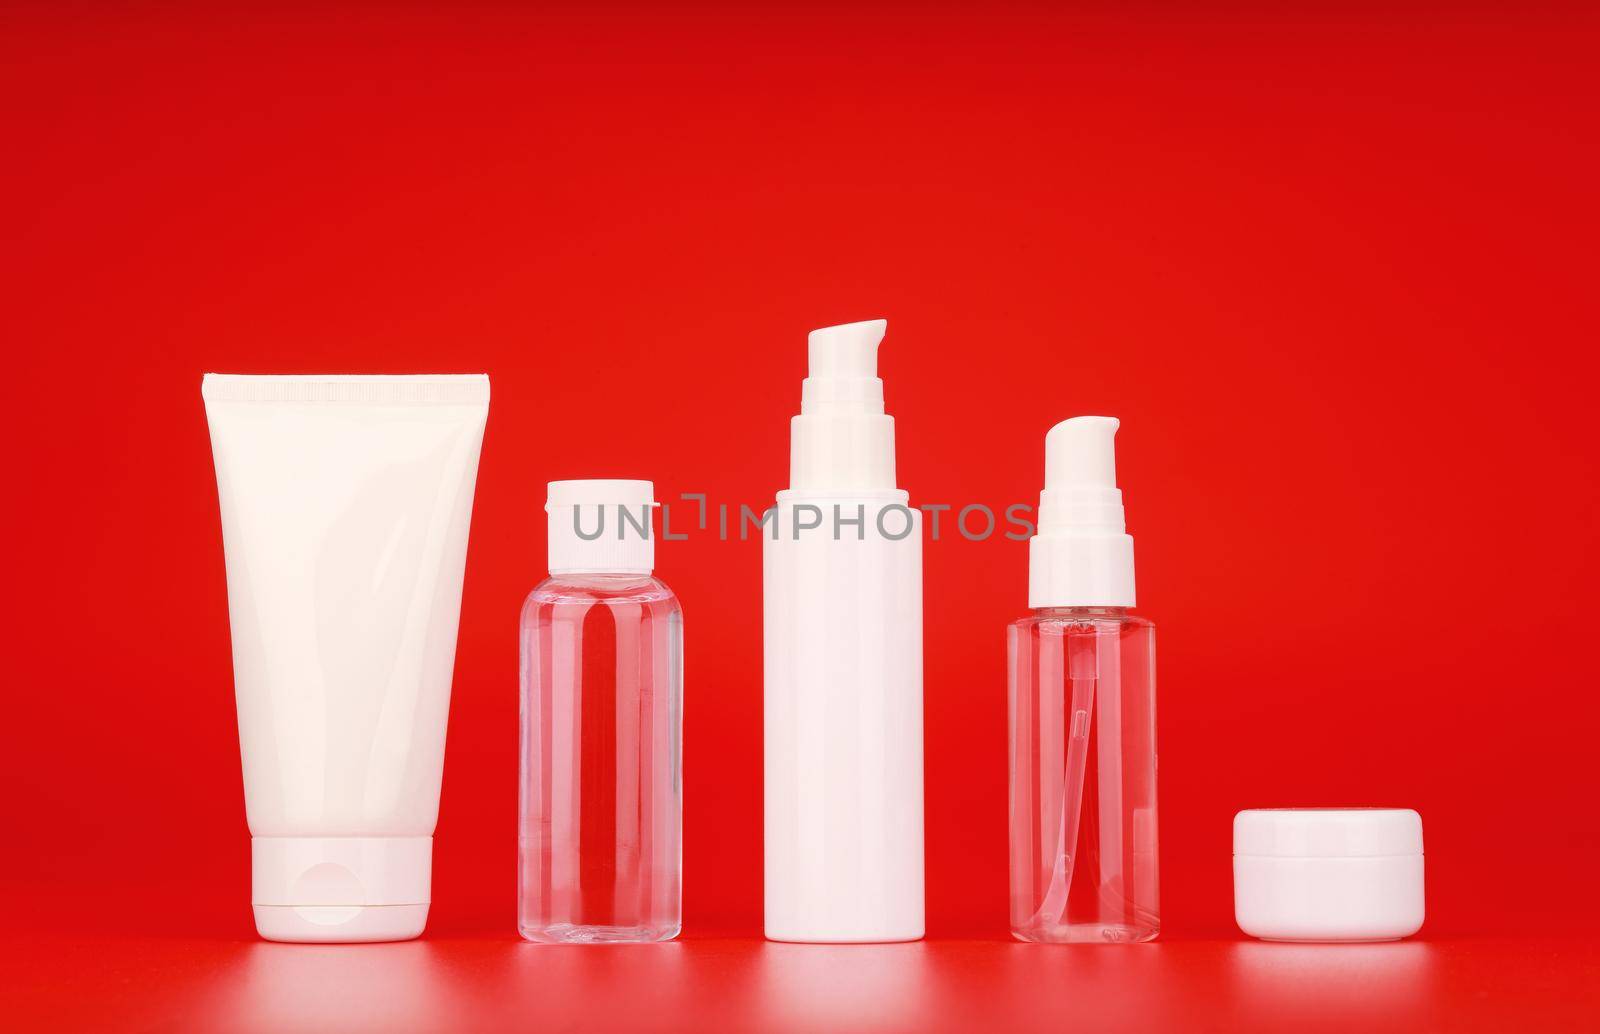 Wide set of cosmetic products for skin care against red background. Concept of daily skin cleaning, exfoliating, moisturizing and anti aging treatment